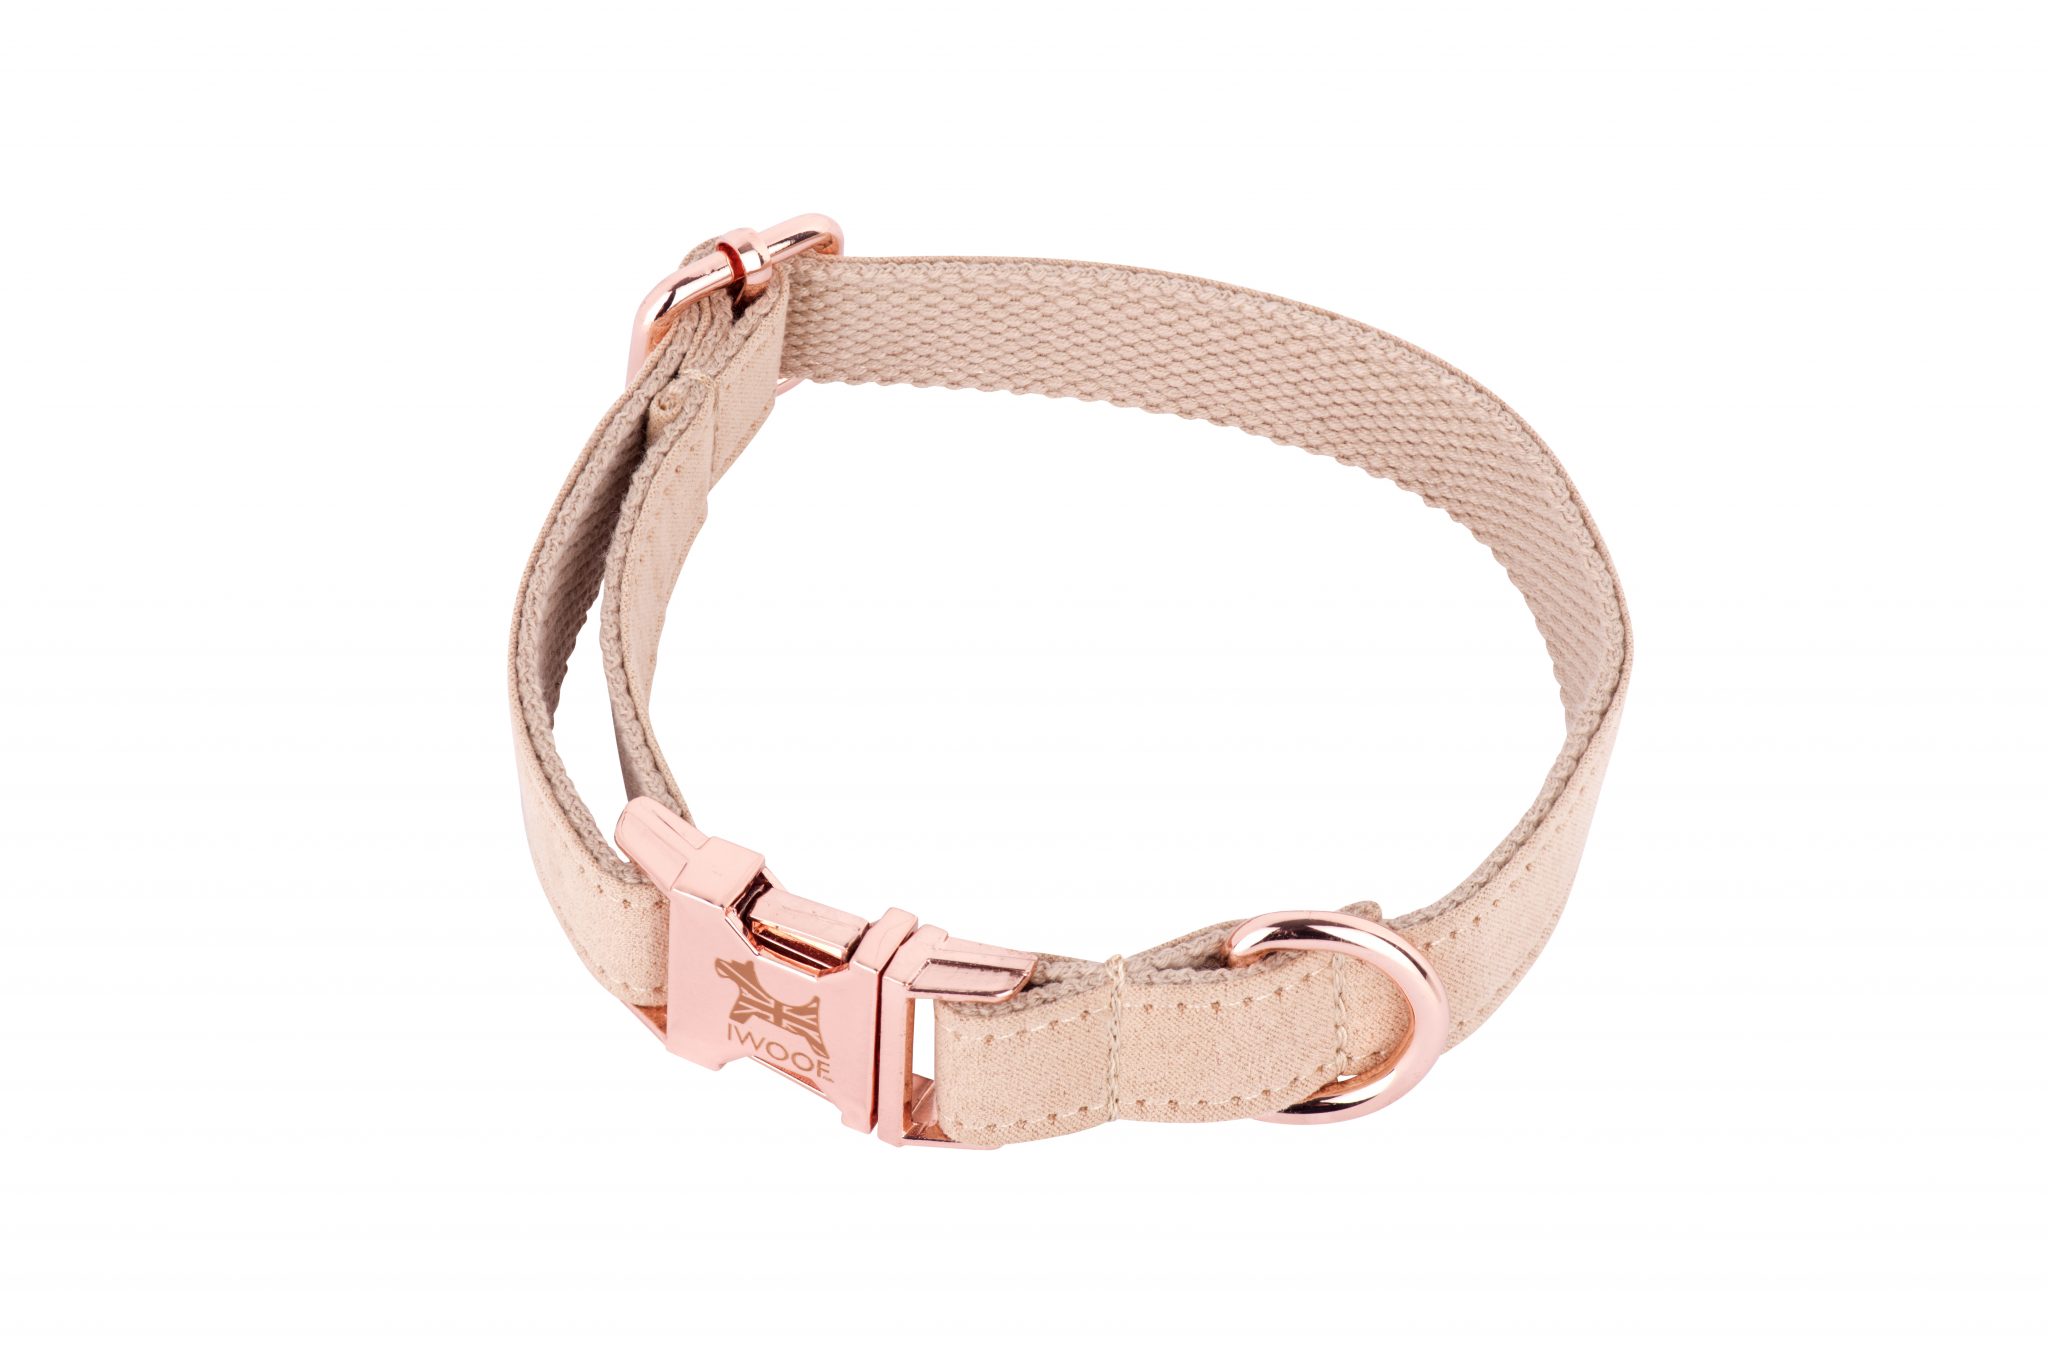 London designer dog collar by IWOOF with rose gold buckle